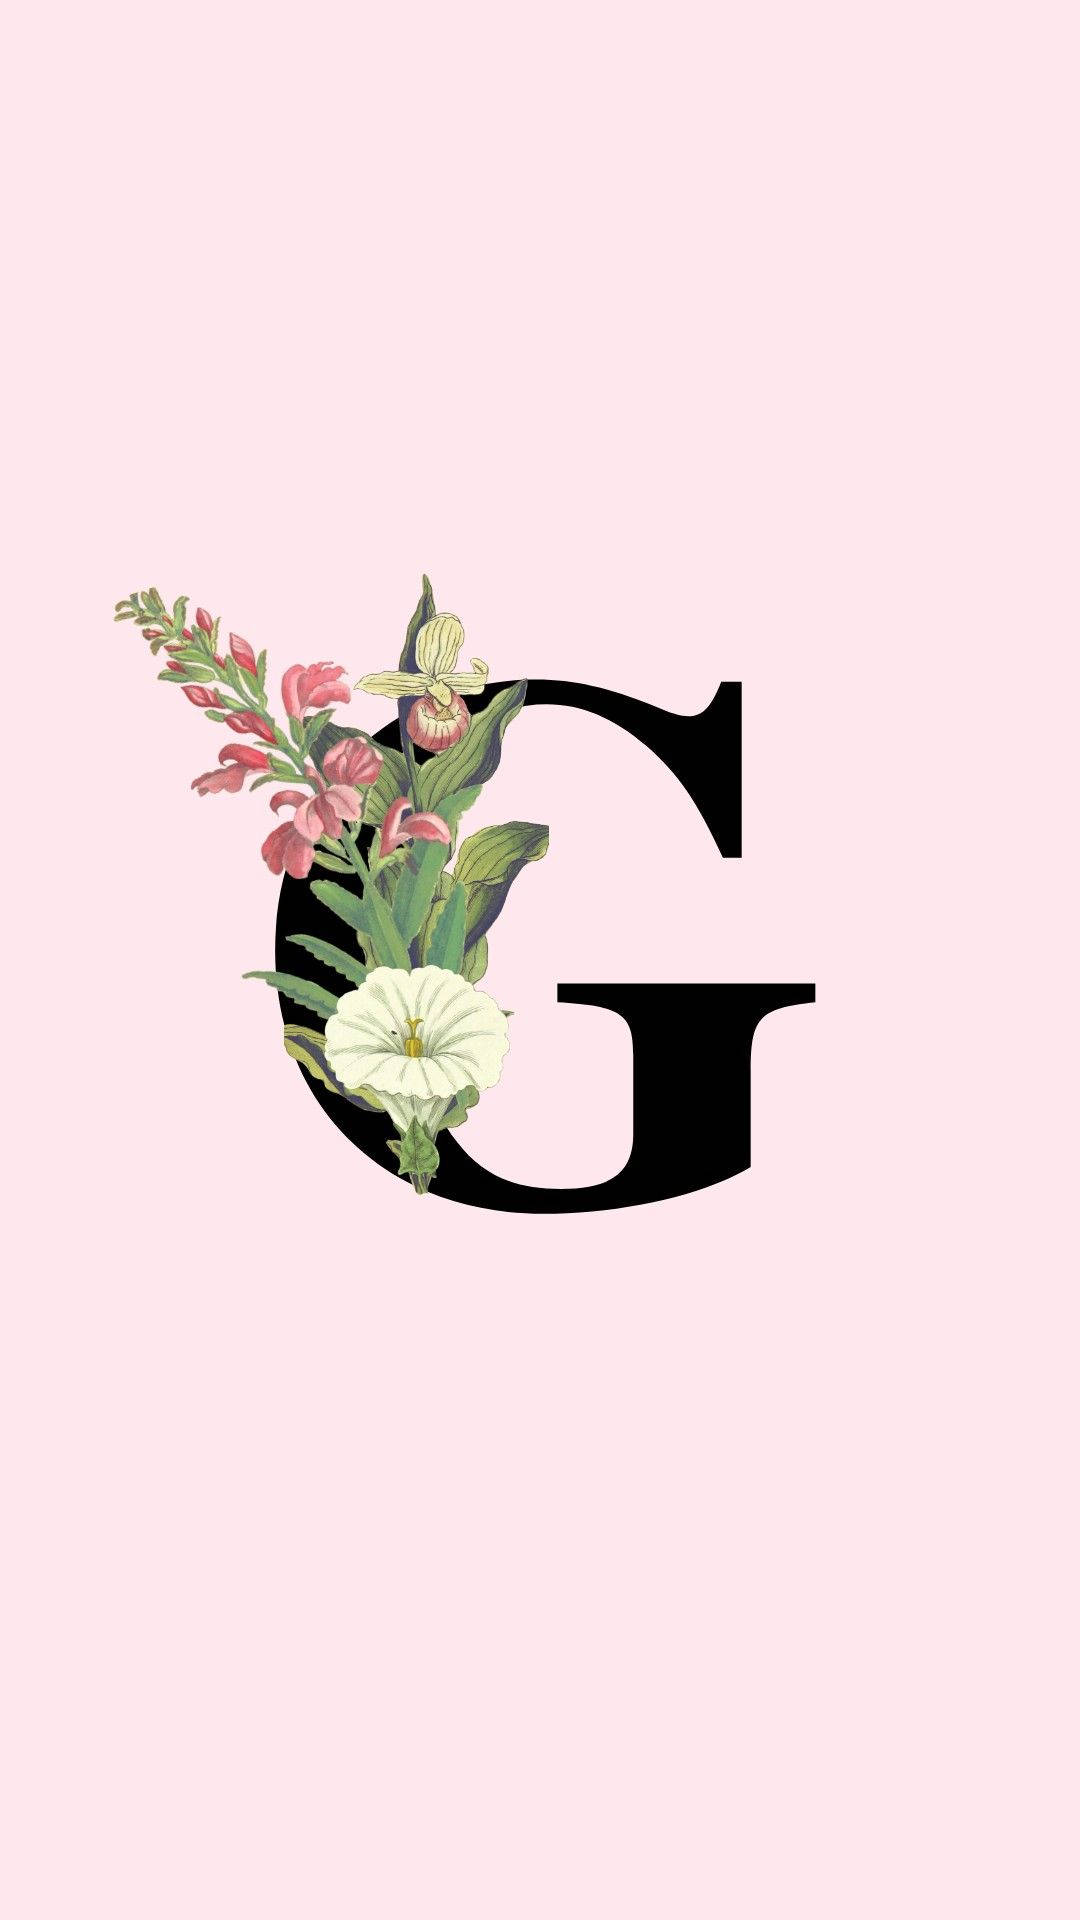 Free Letter G Wallpaper Downloads, [100+] Letter G Wallpapers for FREE |  